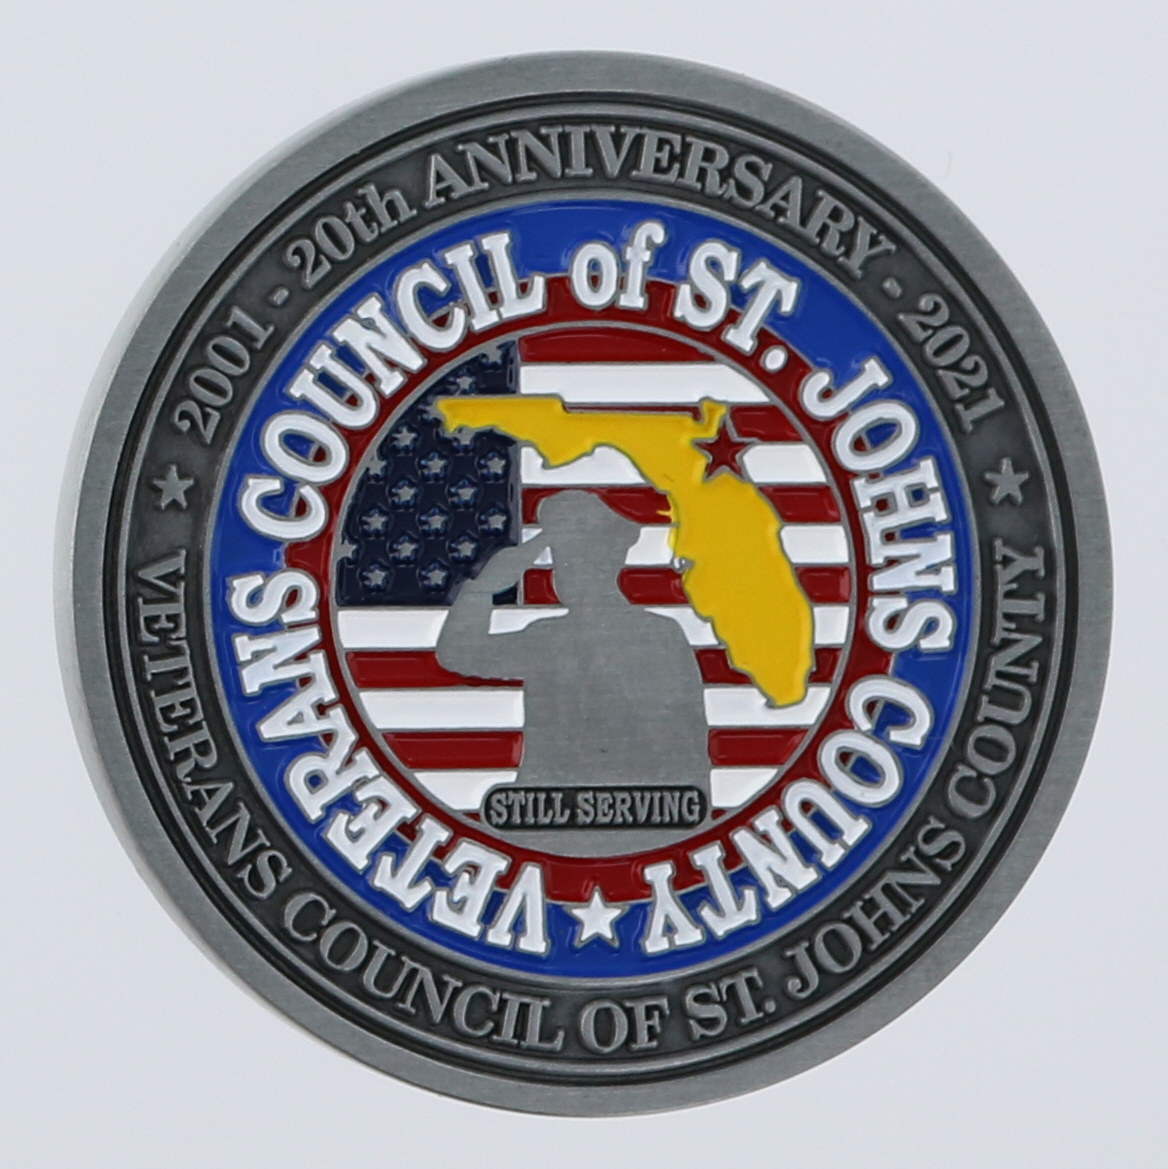 Reverse side of a round challenge coin belonging to the Veterans Council of St. Johns County in St. Augustine, Florida. 